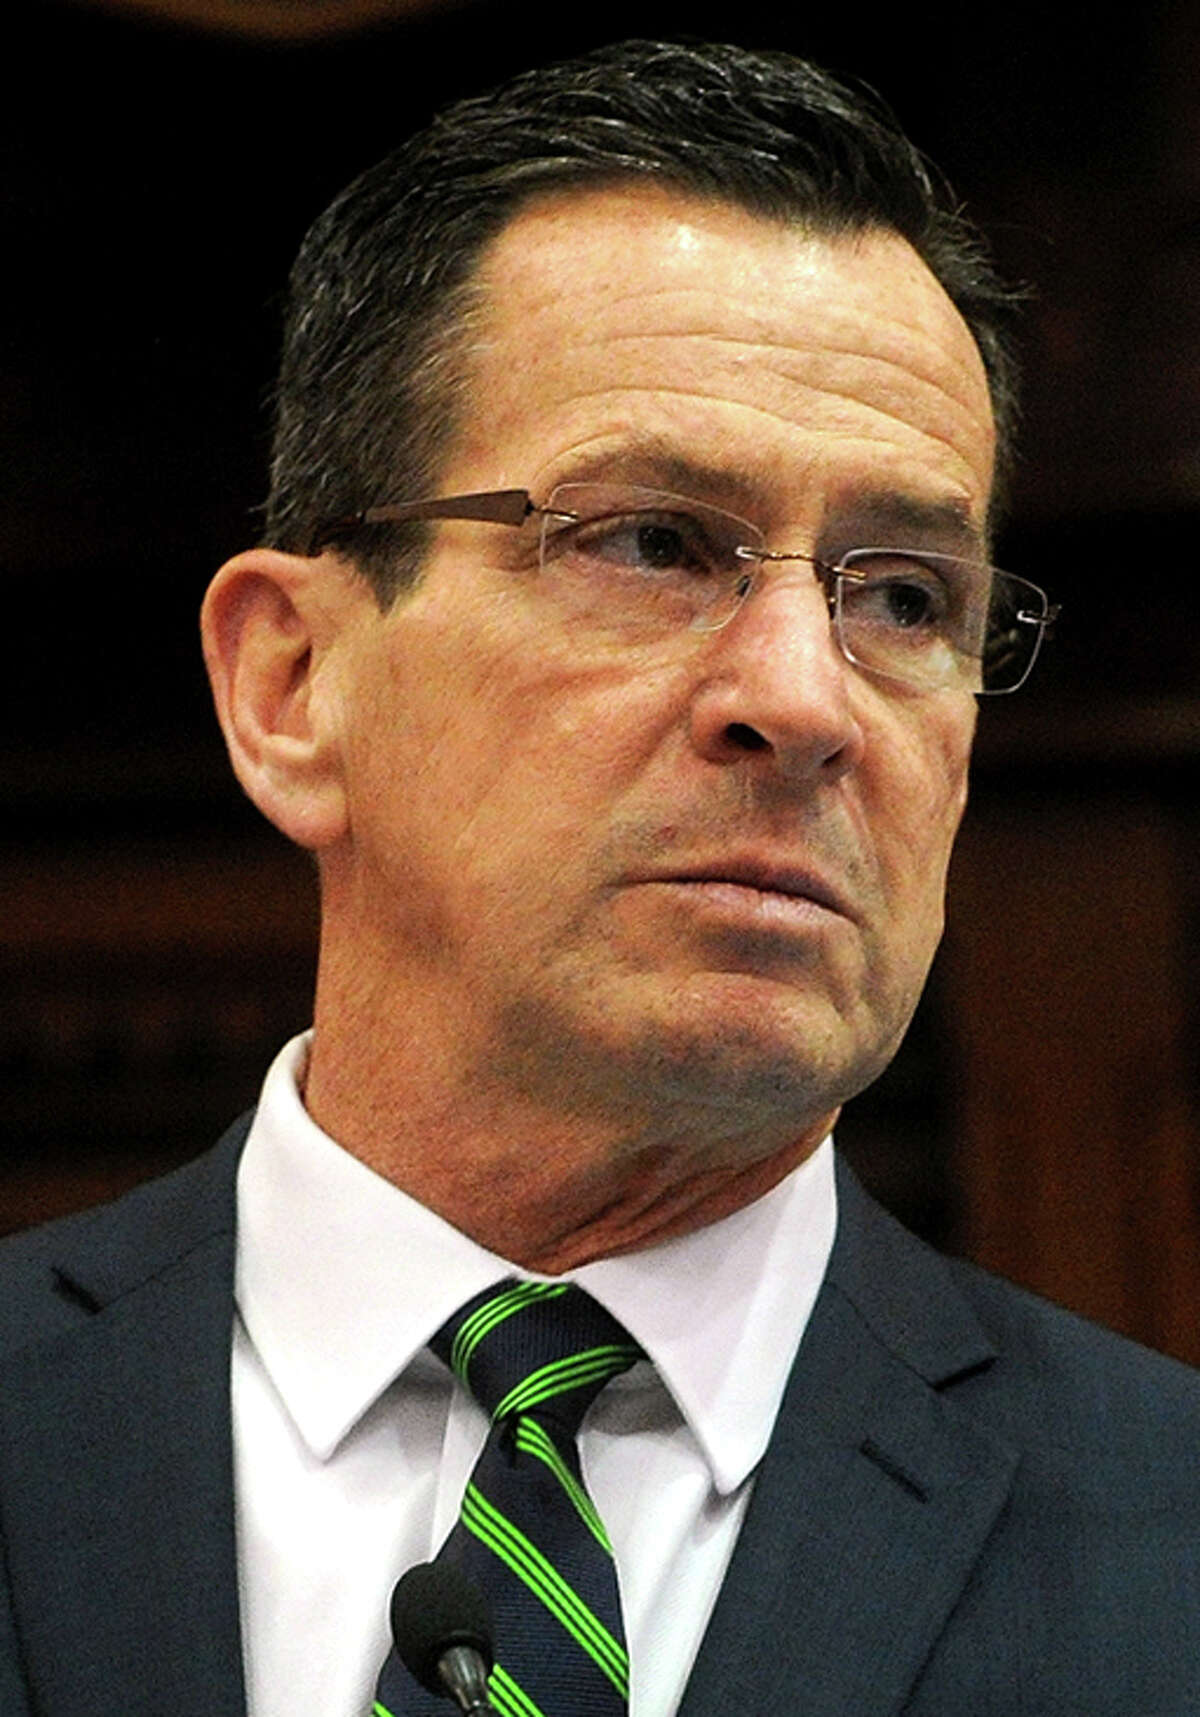 Gov. Dannel P. Malloy delivers his budget address to a joint session of the state legislature at the Capitol in Hartford, Conn. on Wednesday, February 3, 2016.